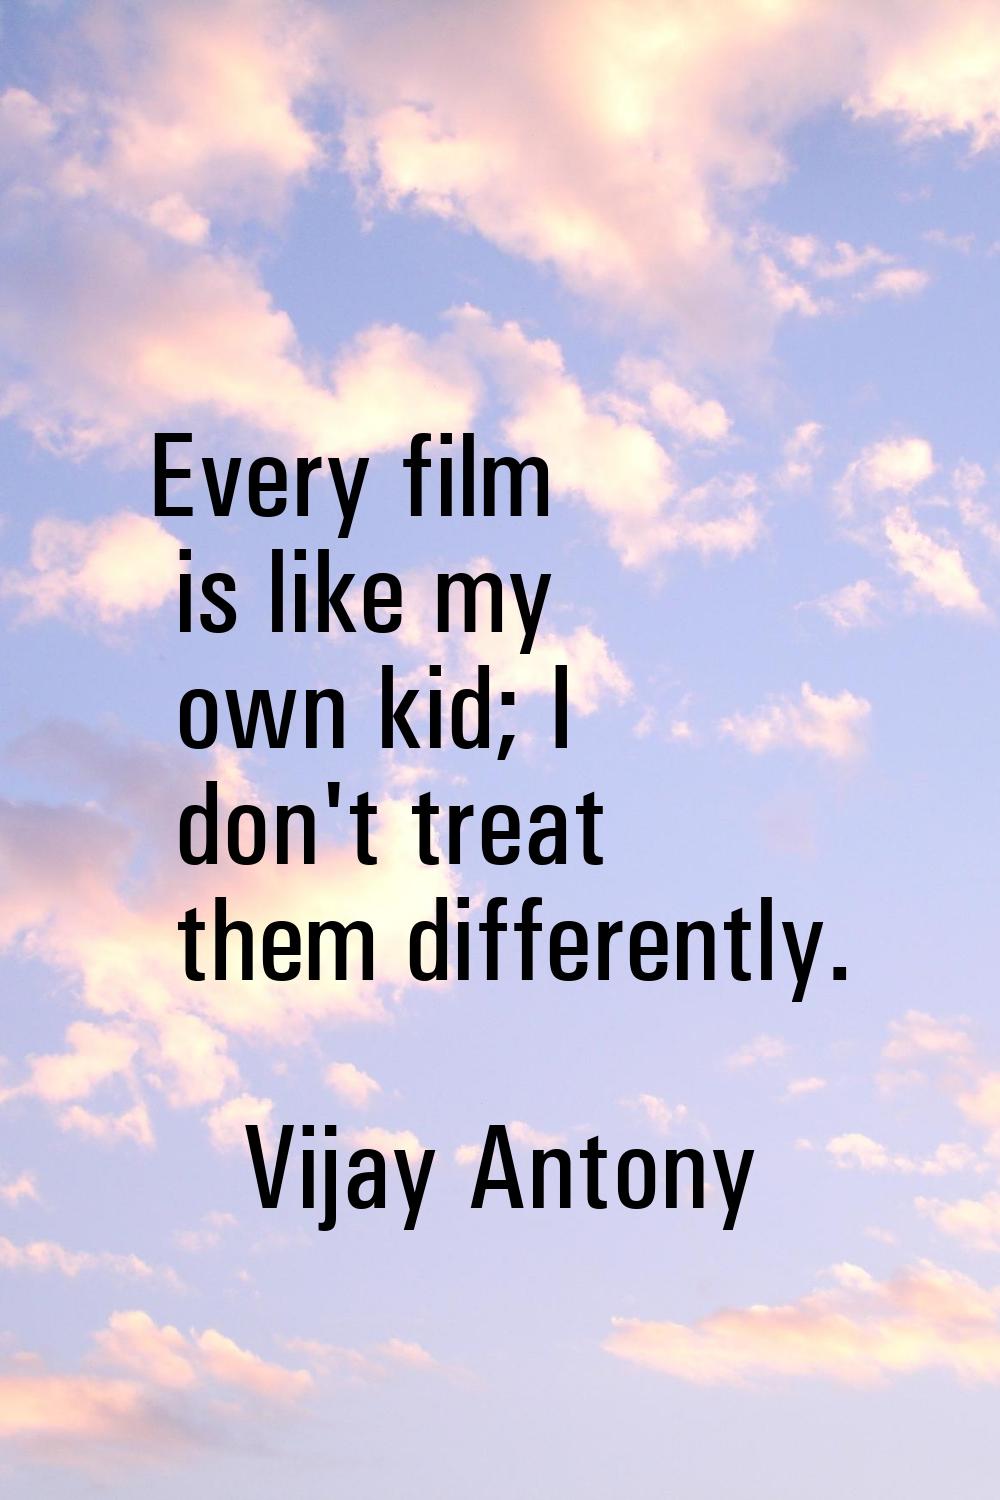 Every film is like my own kid; I don't treat them differently.